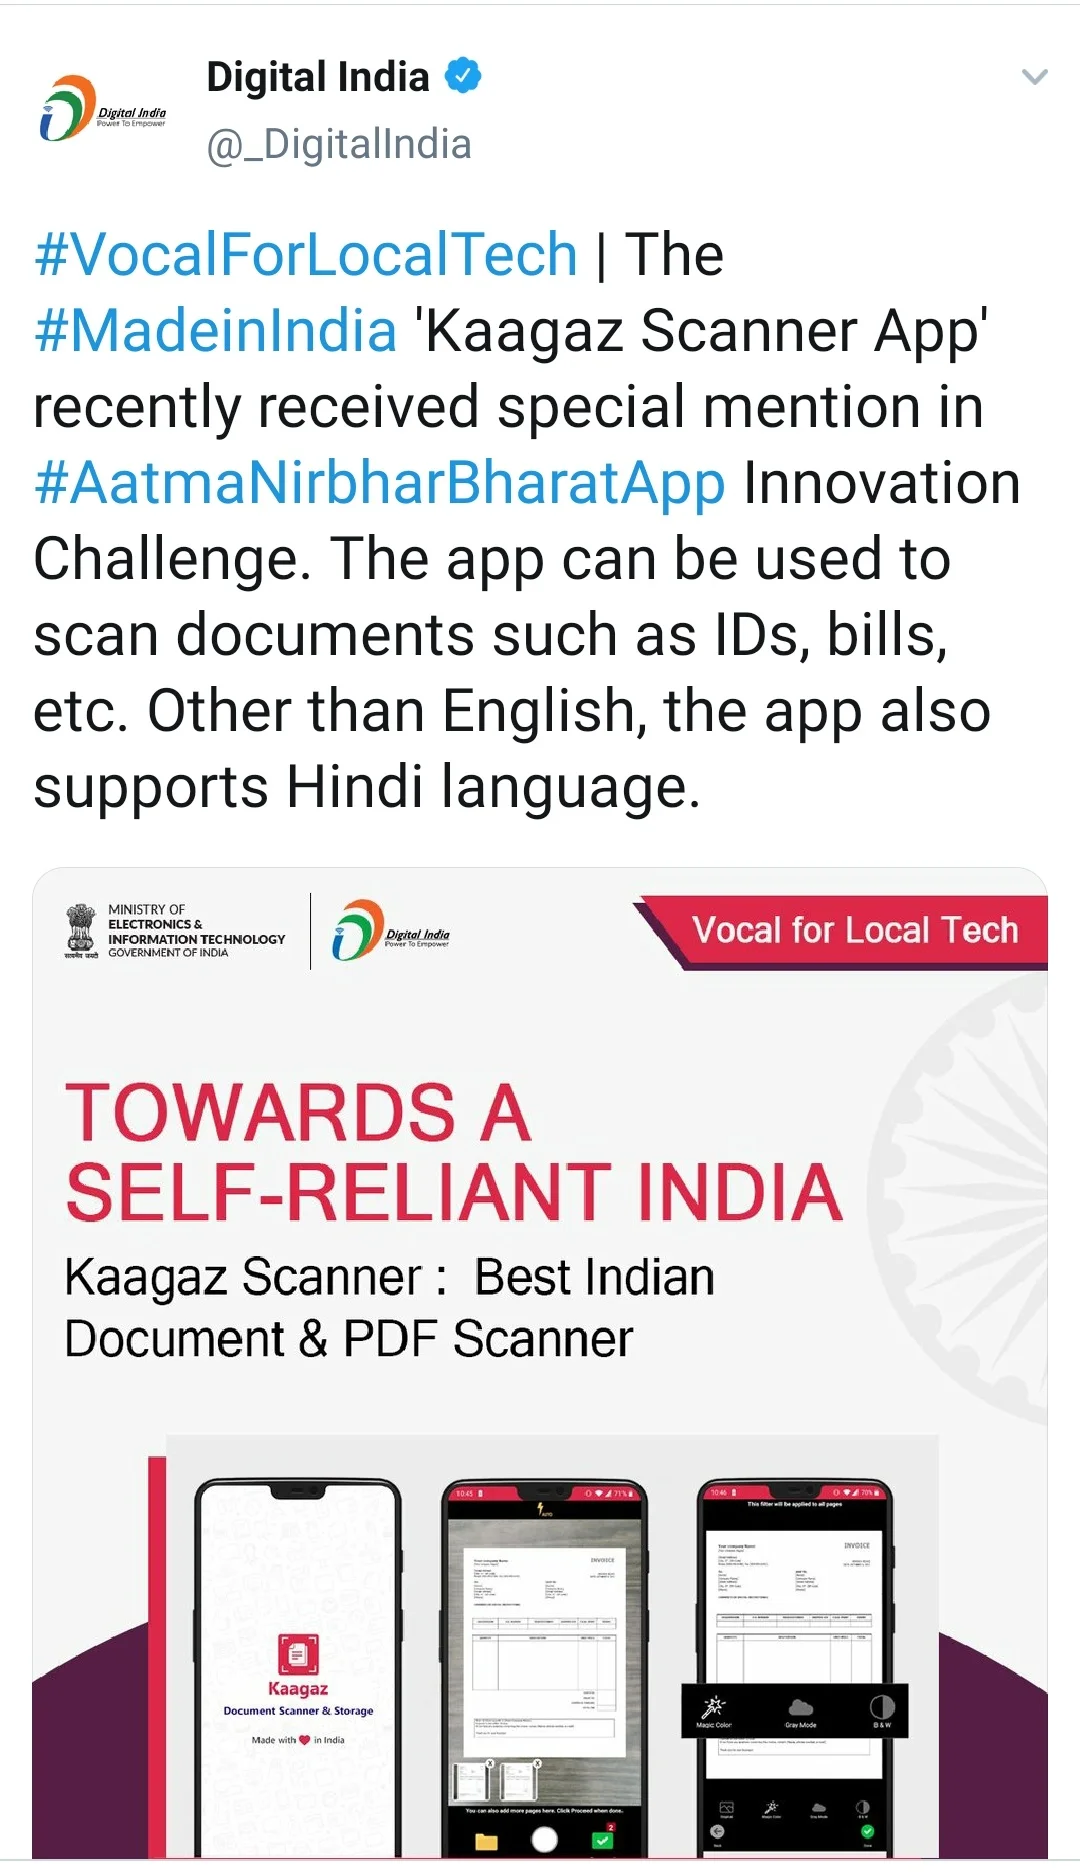 Shout out by Digital India/MeitY